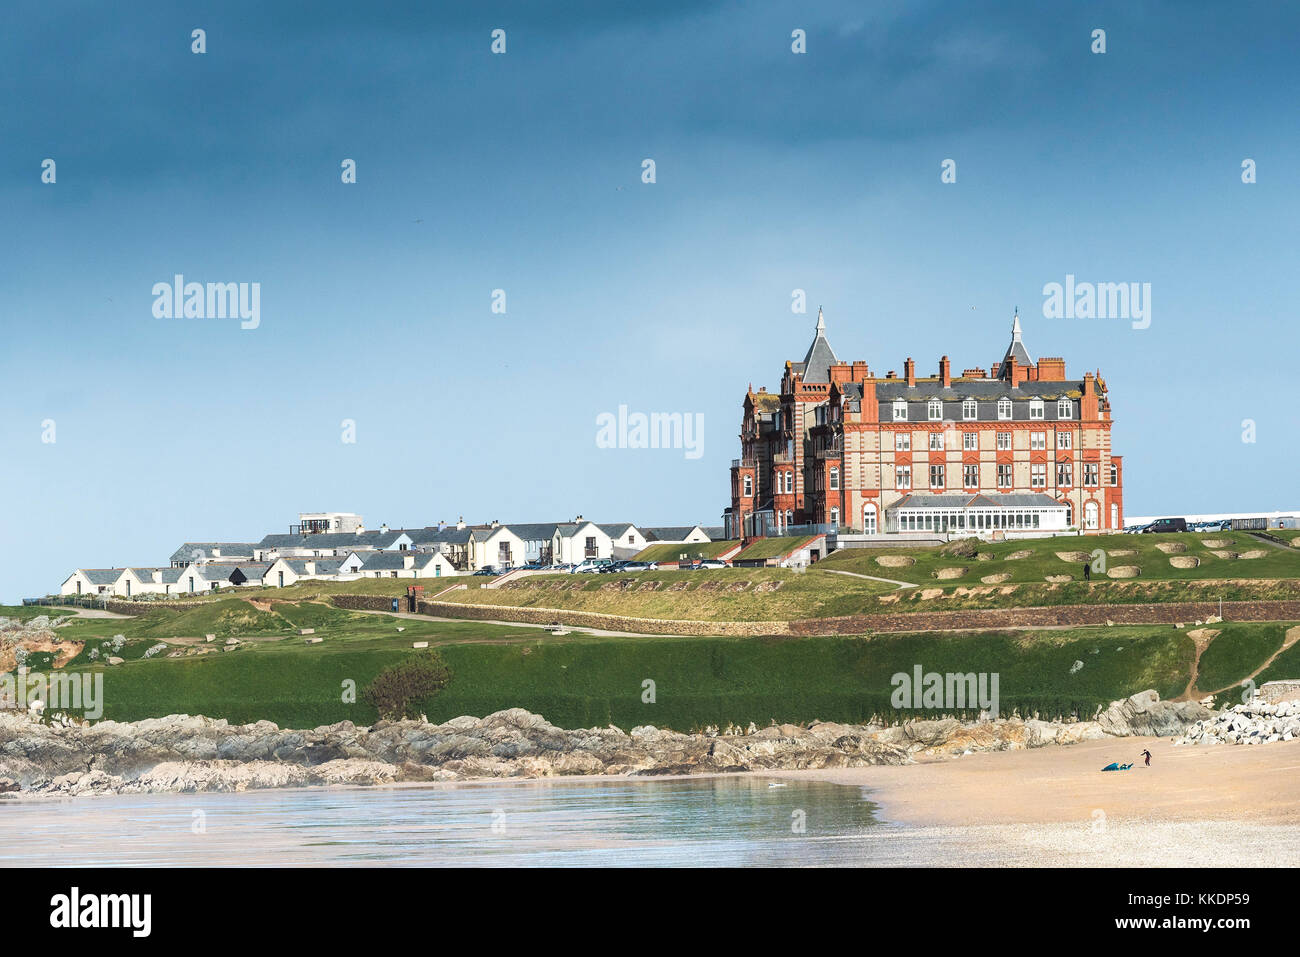 Headland Hotel Newquay - The iconic Headland Hotel overlooking Fistral Beach in Newquay Cornwall UK. Stock Photo